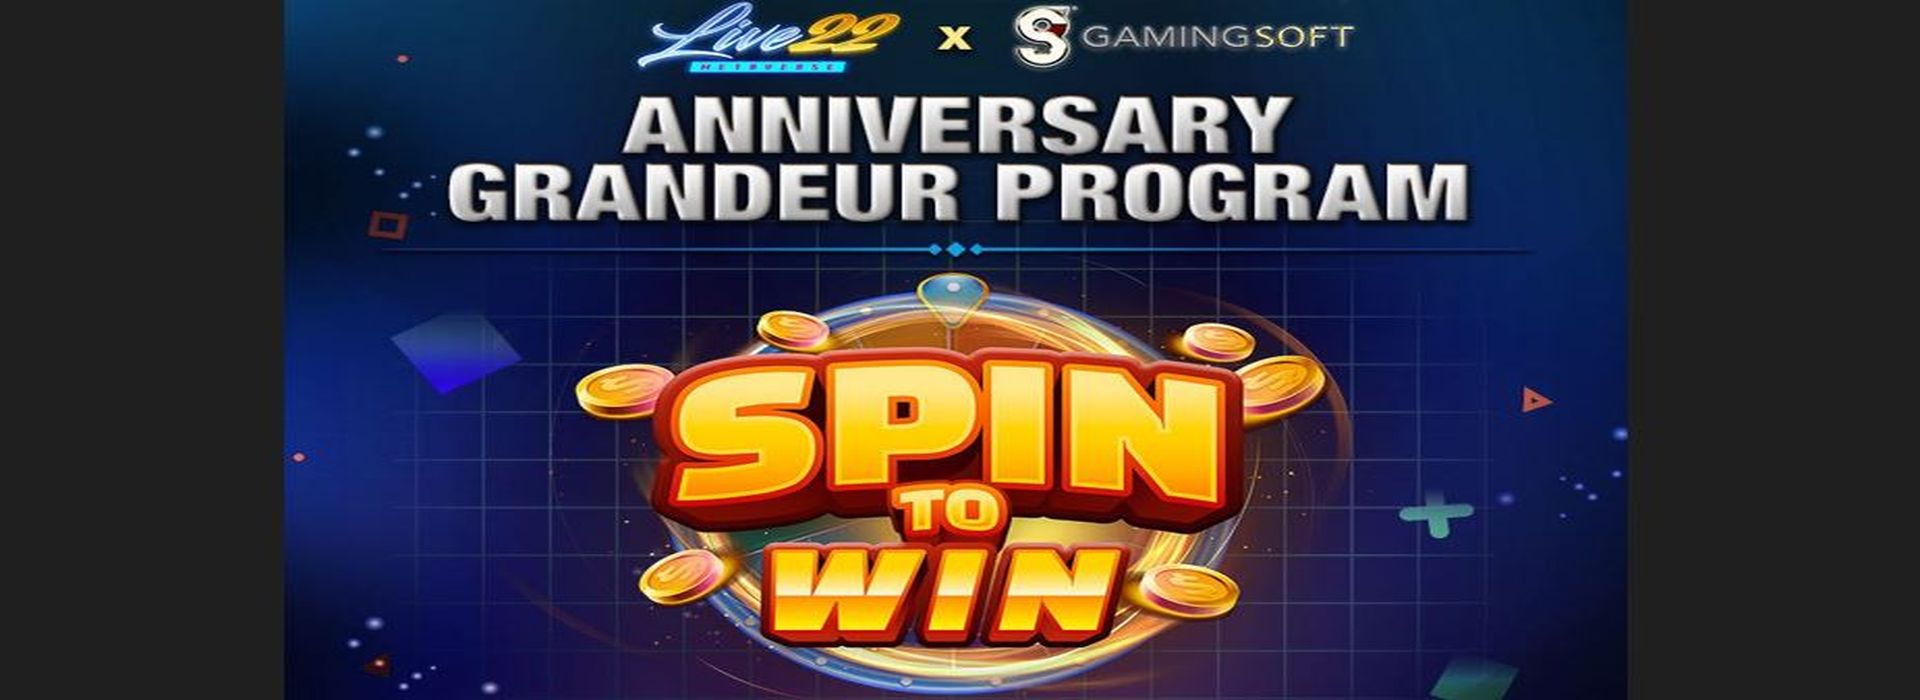 To celebrate GAMINGSOFT’s anniversary, we are thrilled to introduce the "Spin to Win" event!